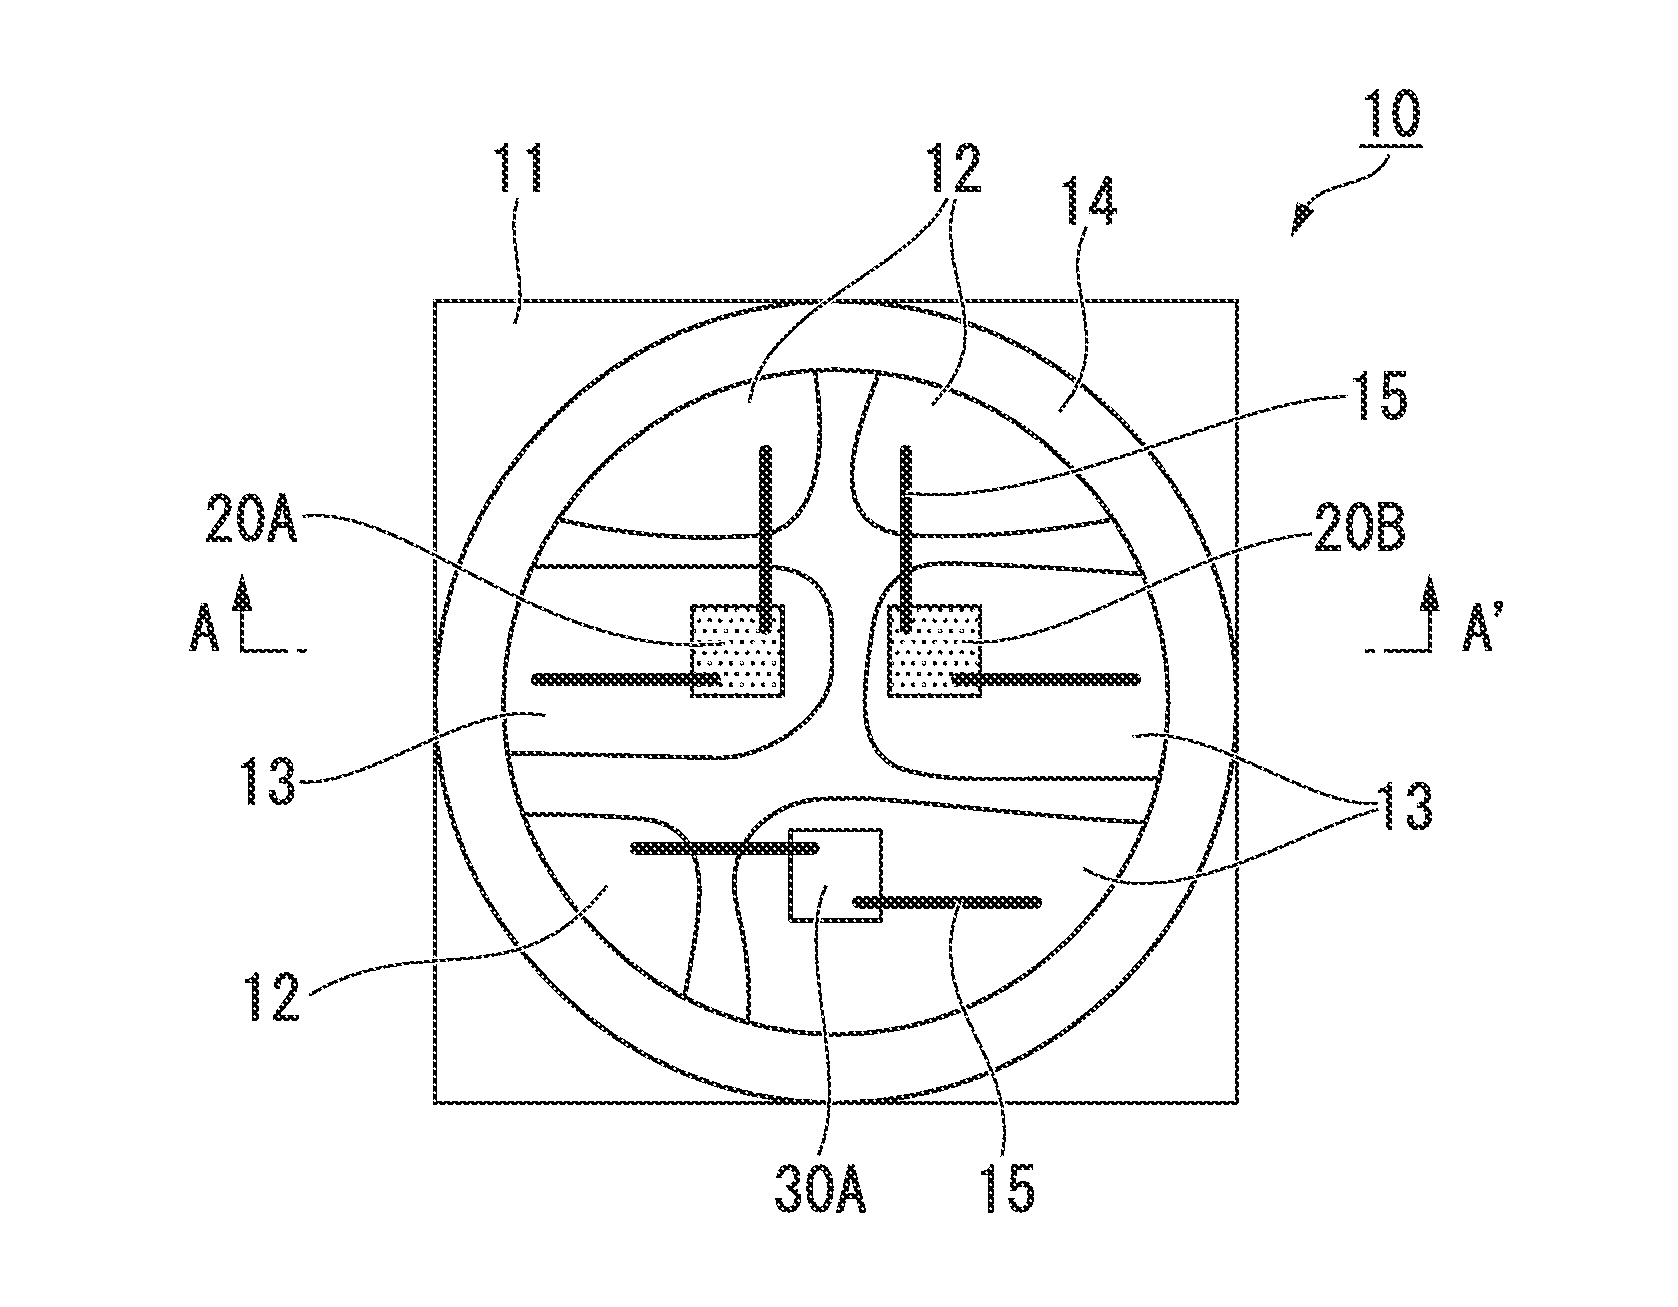 Multicolor light emitting diode lamp for plant growth, illumination apparatus, and plant growth method